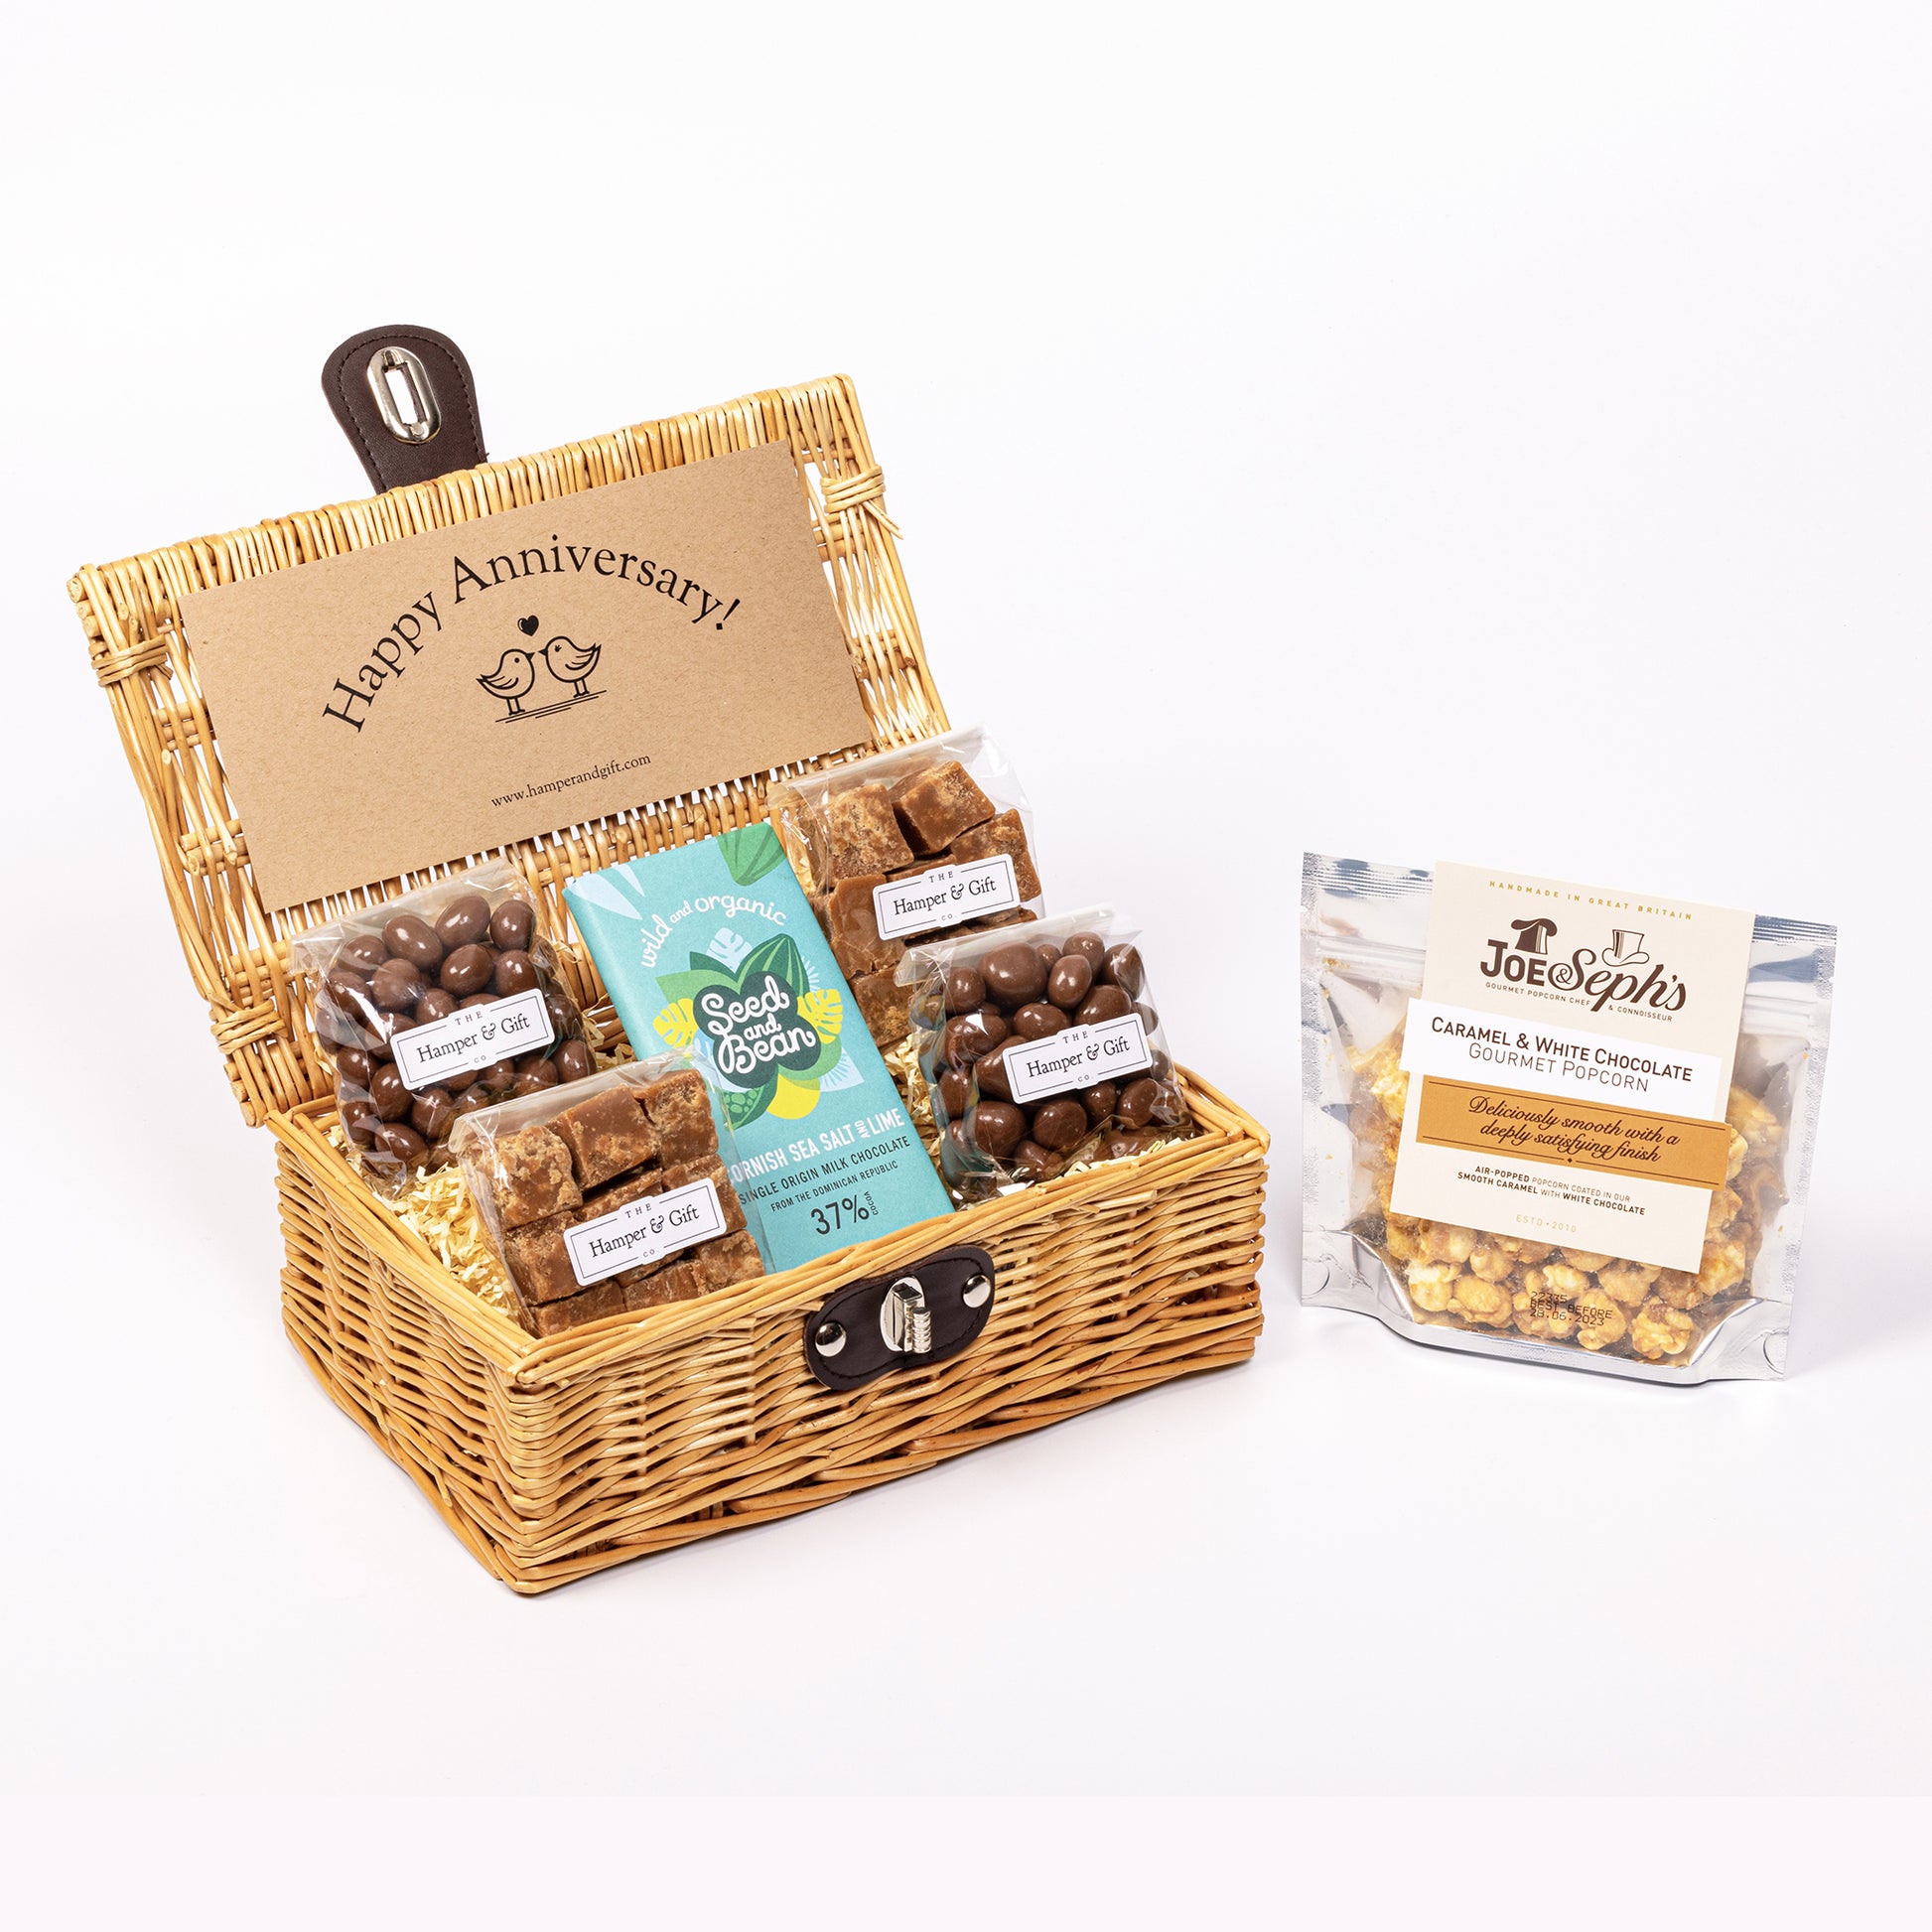 Little Anniversary Hamper filled with chocolate, fudge and gourmet popcorn